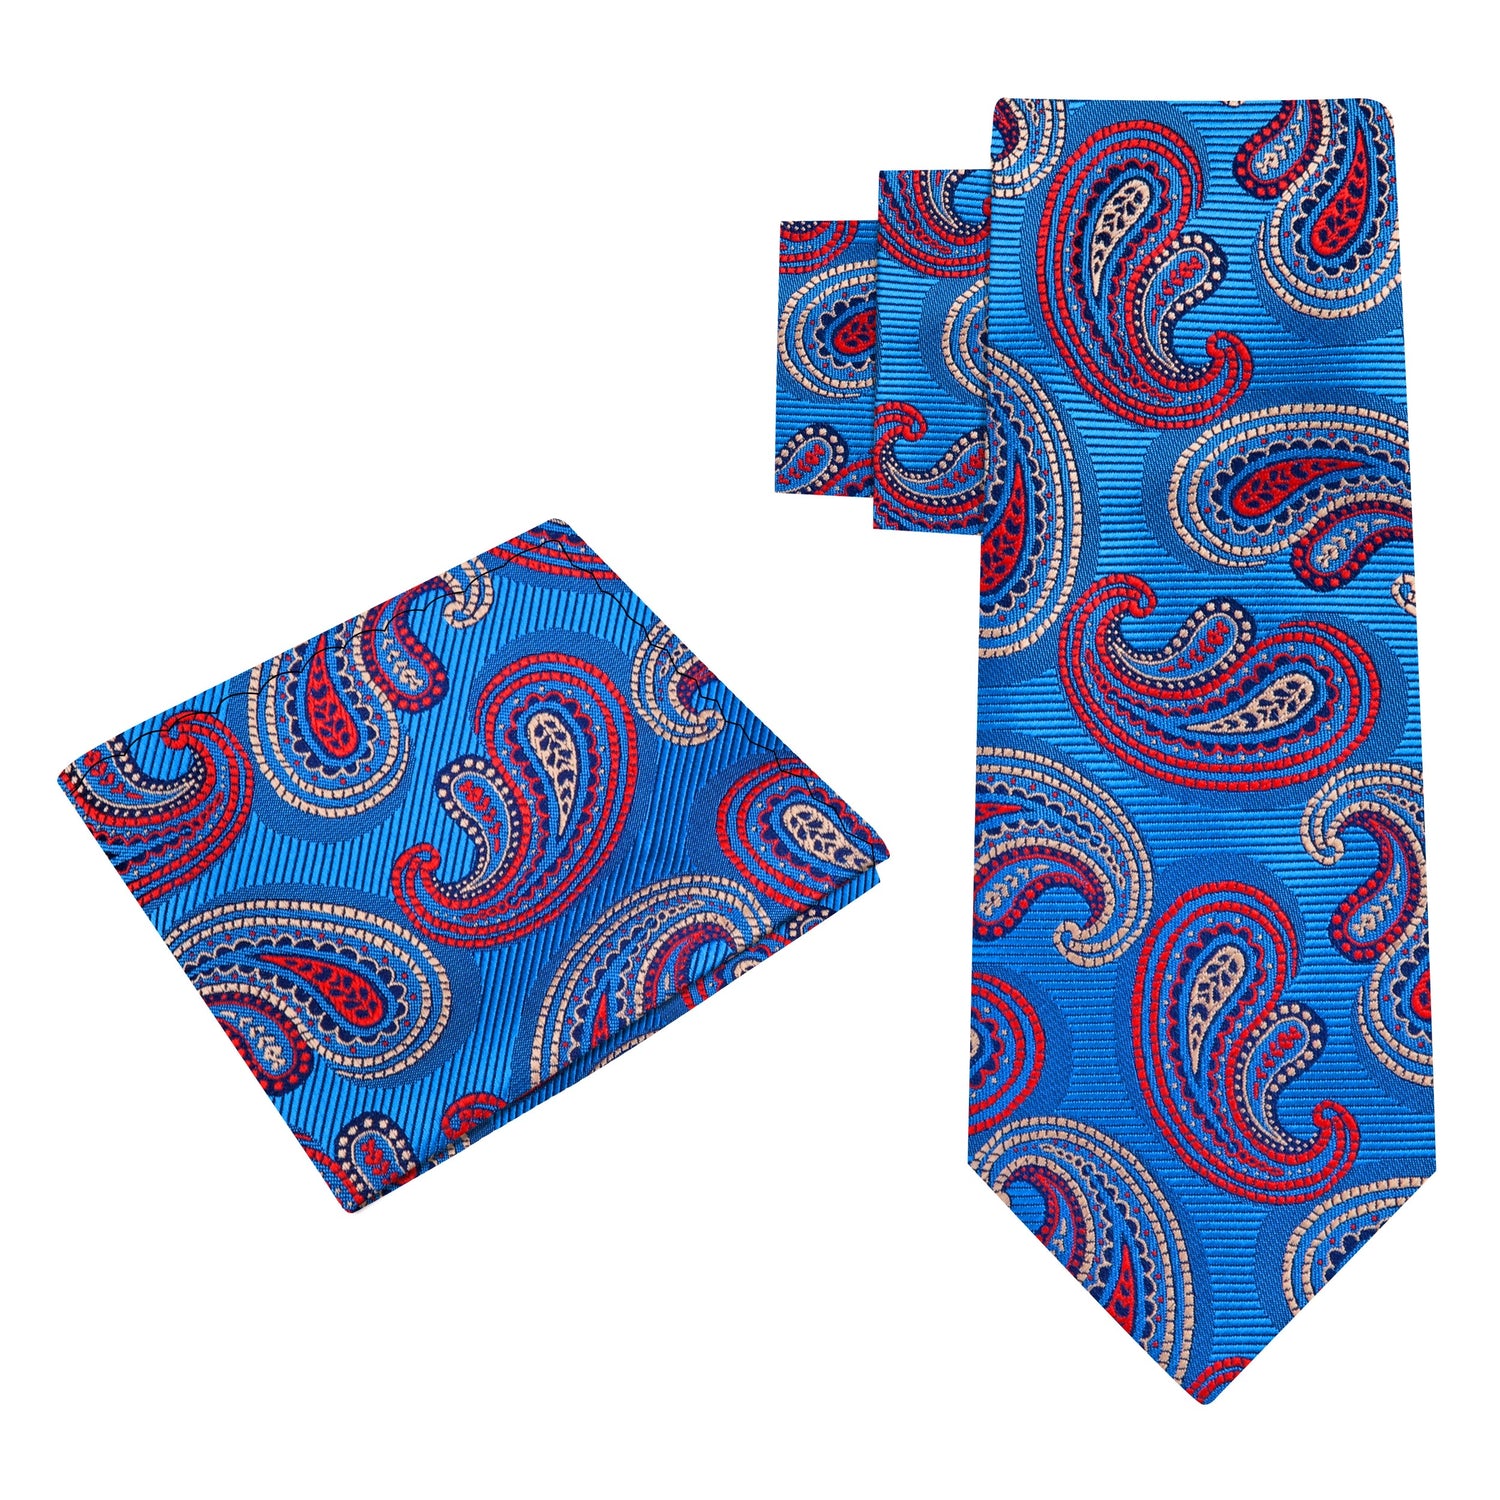 Alt View: Blue, Red Paisley Pattern Silk Necktie, With Matching Pocket Square 